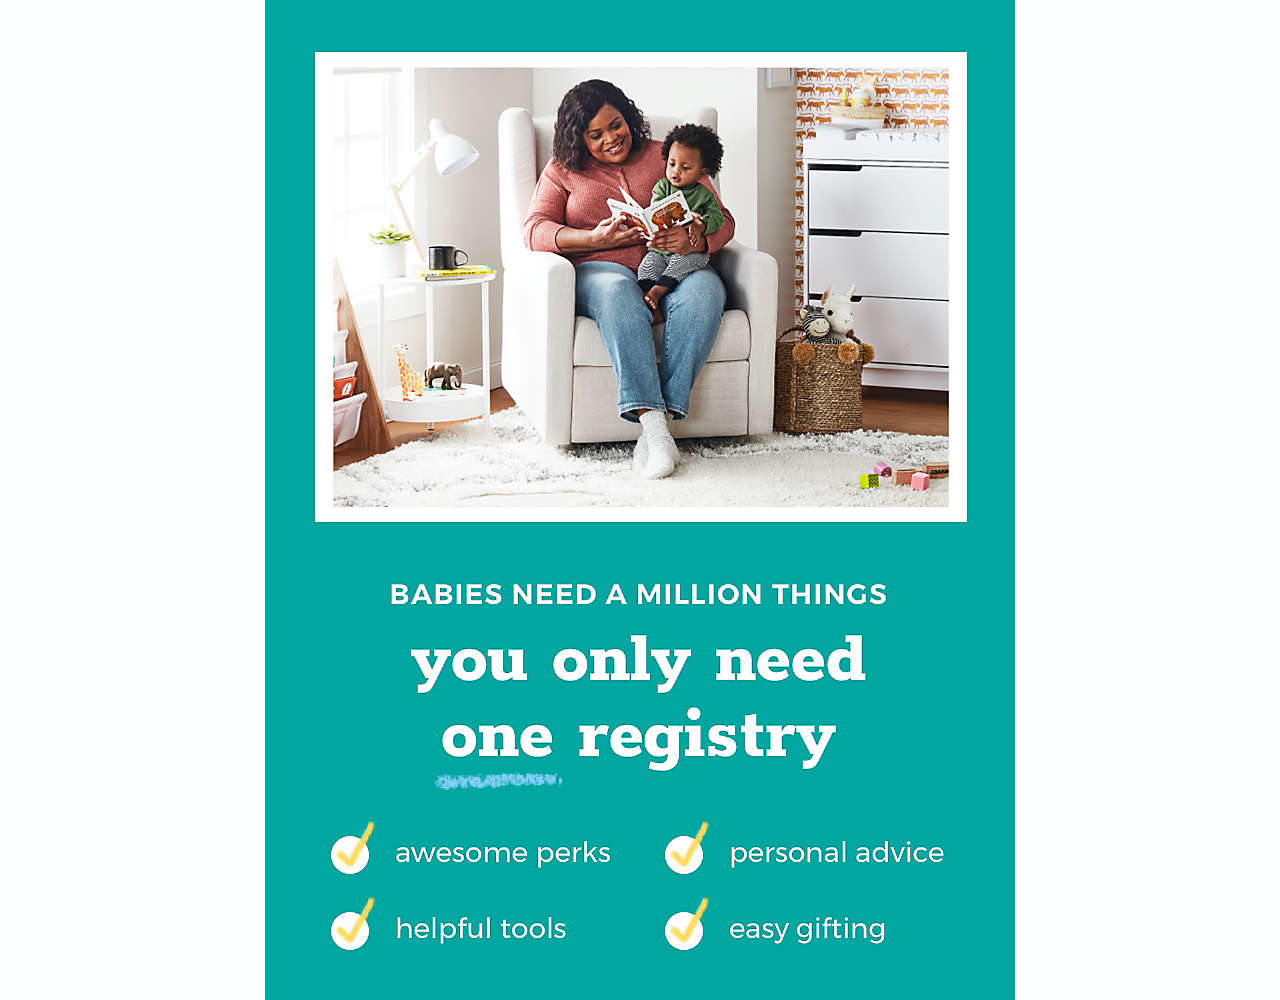 BABIES NEED A MILLION THINGS you only need one registry ✓ awesome perks ✓ personal advice ✓ helpful tools ✓ easy gifting